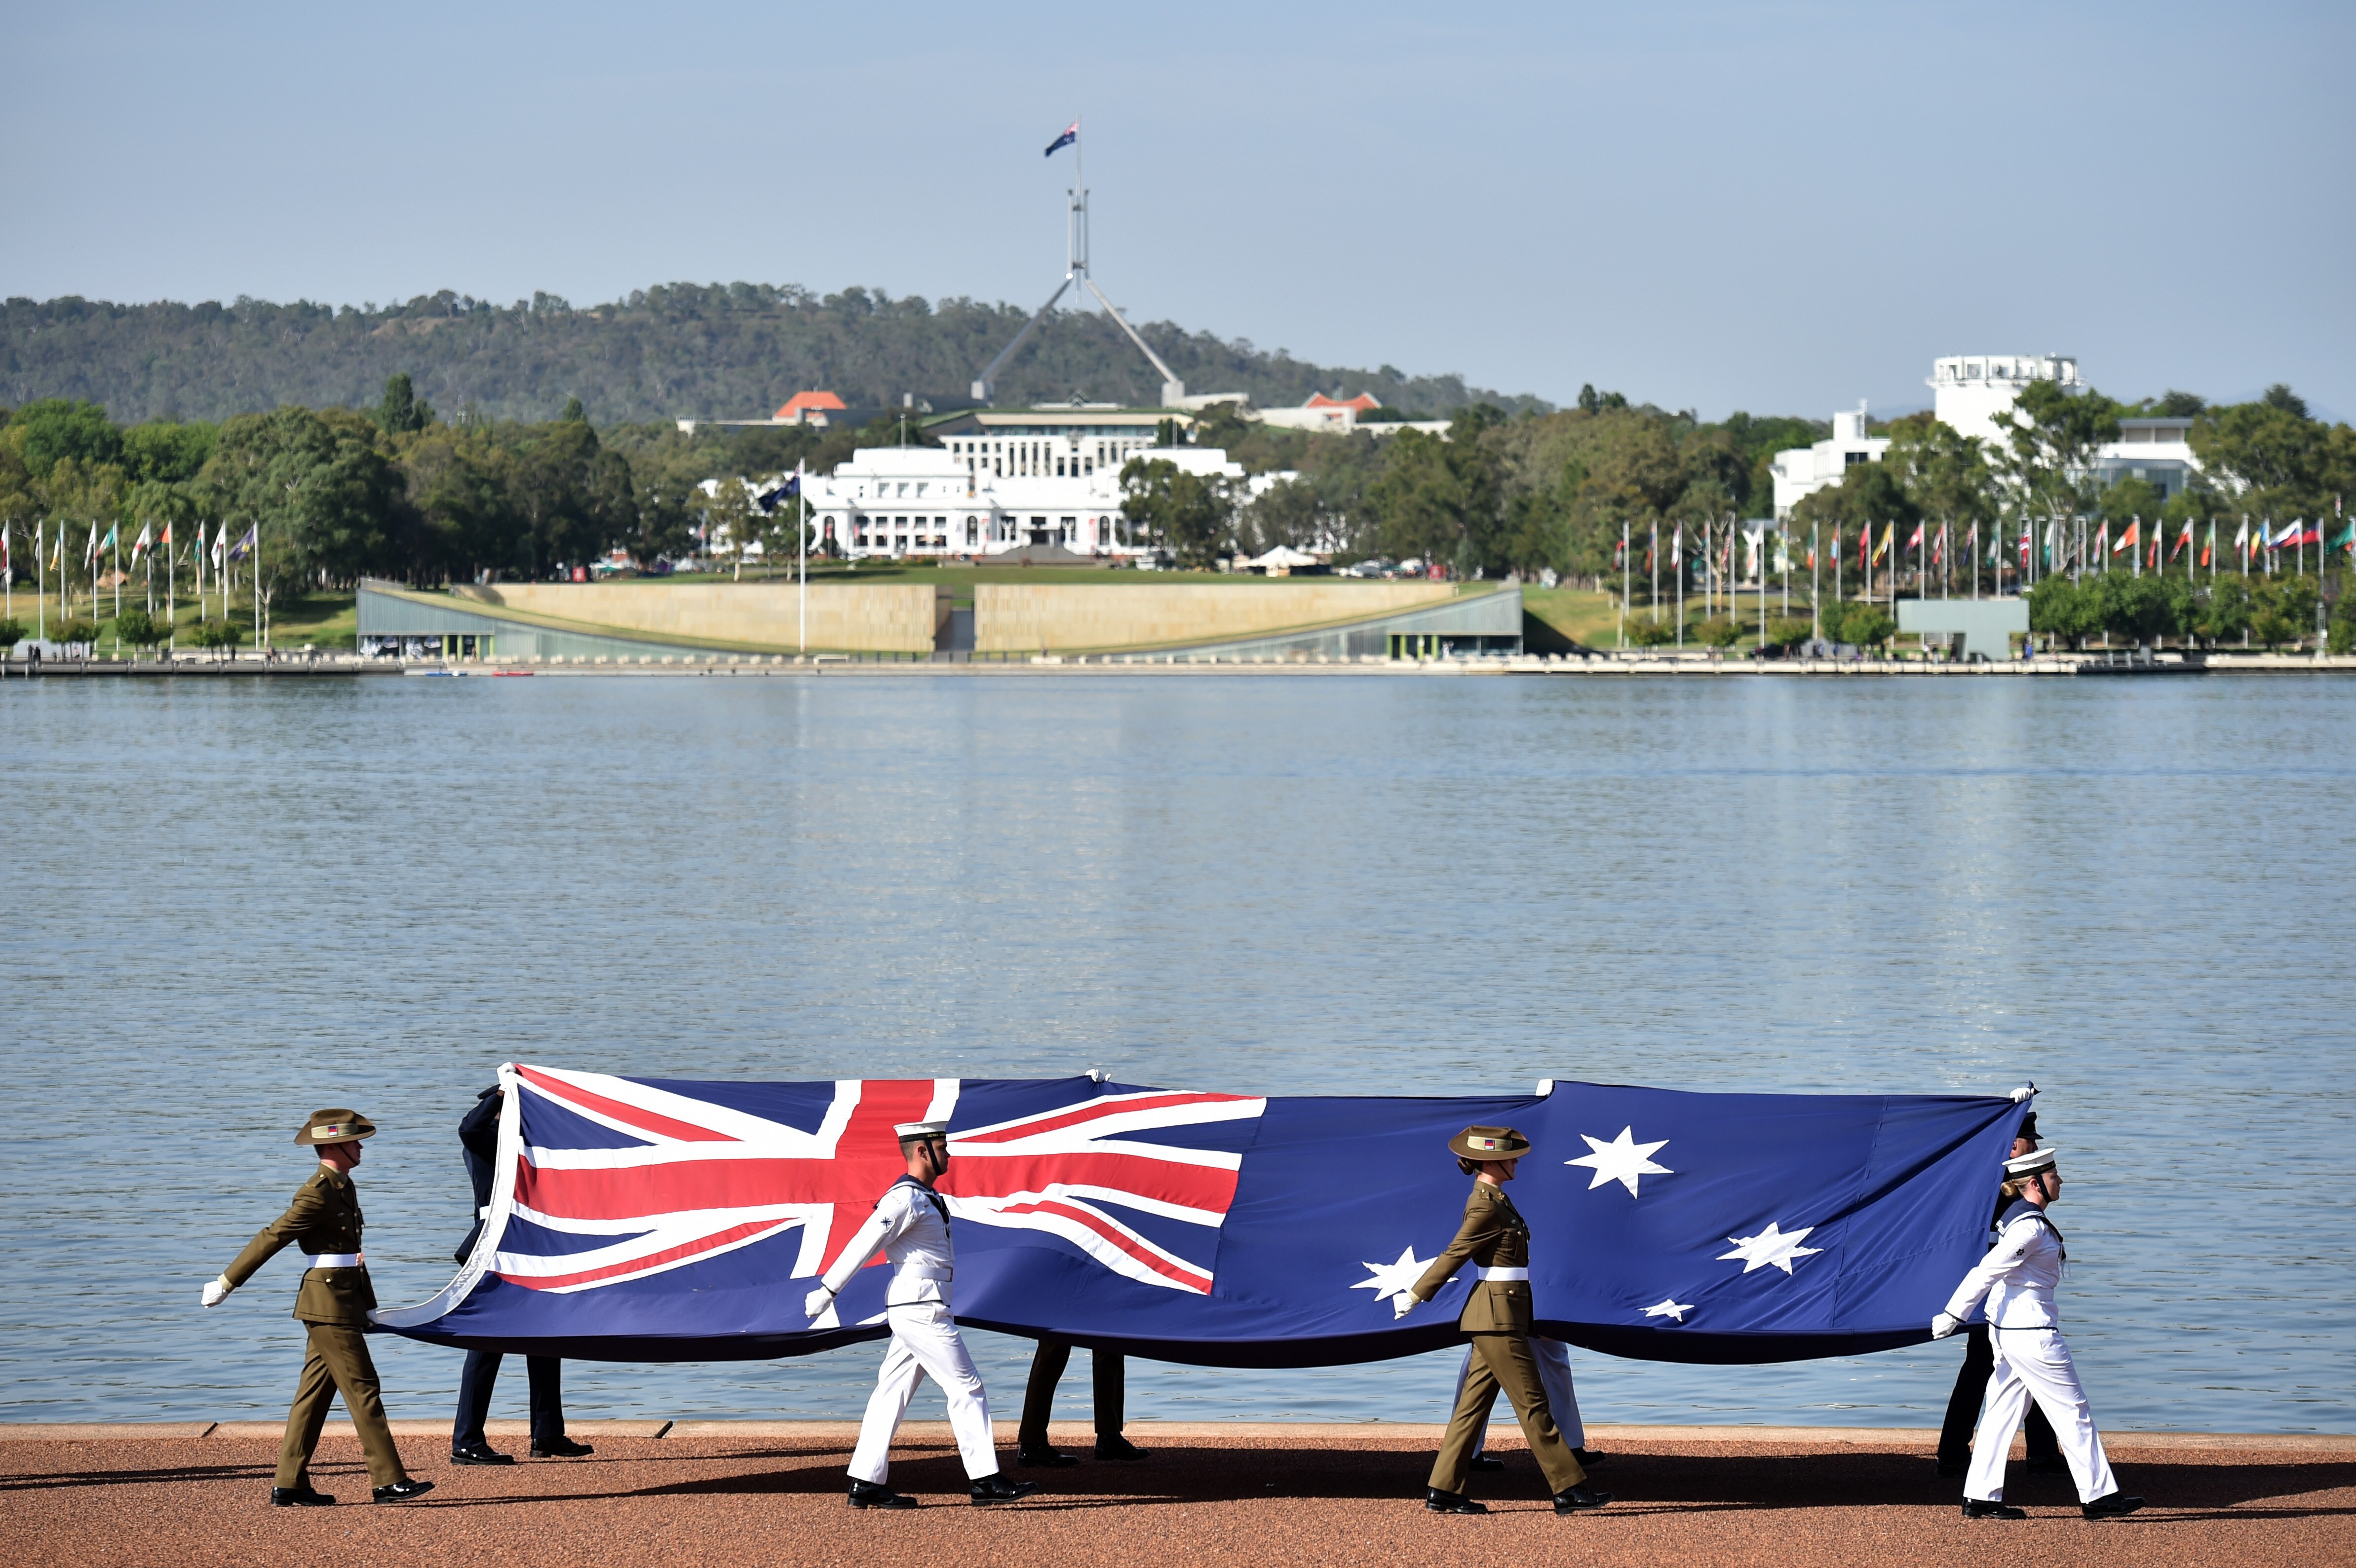 Defence personnel march past with the Australian flag at an Australia Day Citizenship Ceremony and Flag Raising event in Canberra, Saturday, January 26, 2019. (AAP Image/Mick Tsikas)